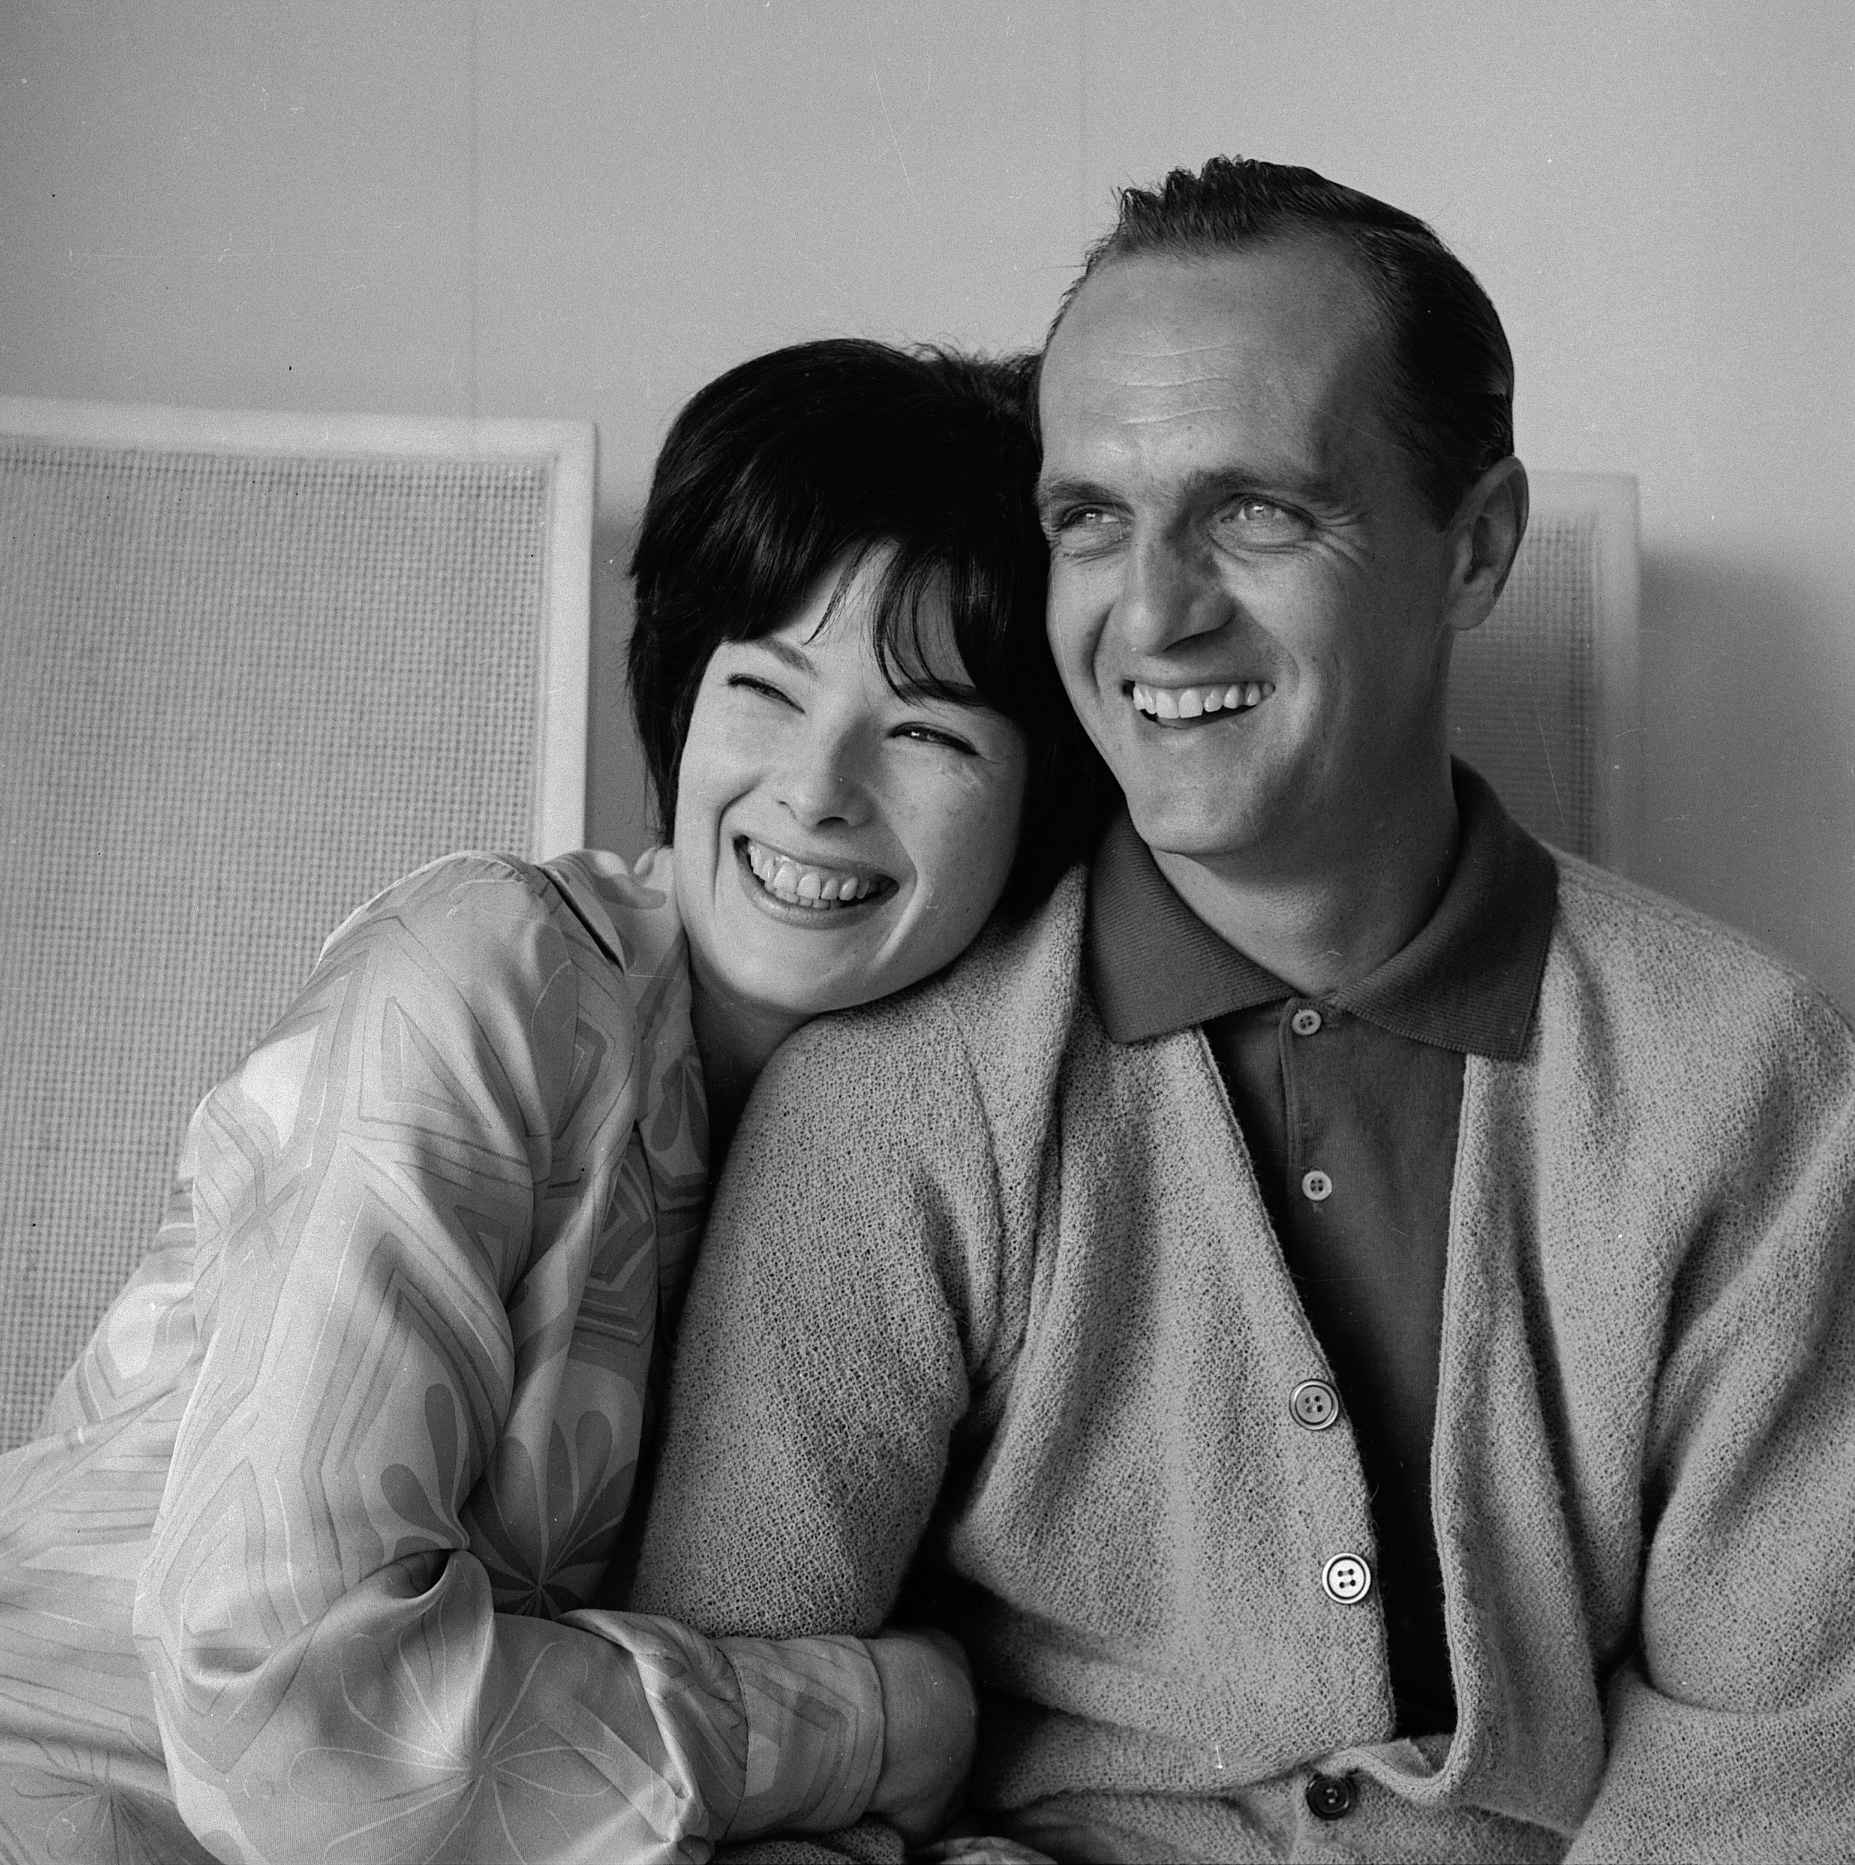 Bob Newhart and his wife Ginnie Newhart at their home in Westwood, Los Angeles, California on May 21, 1964